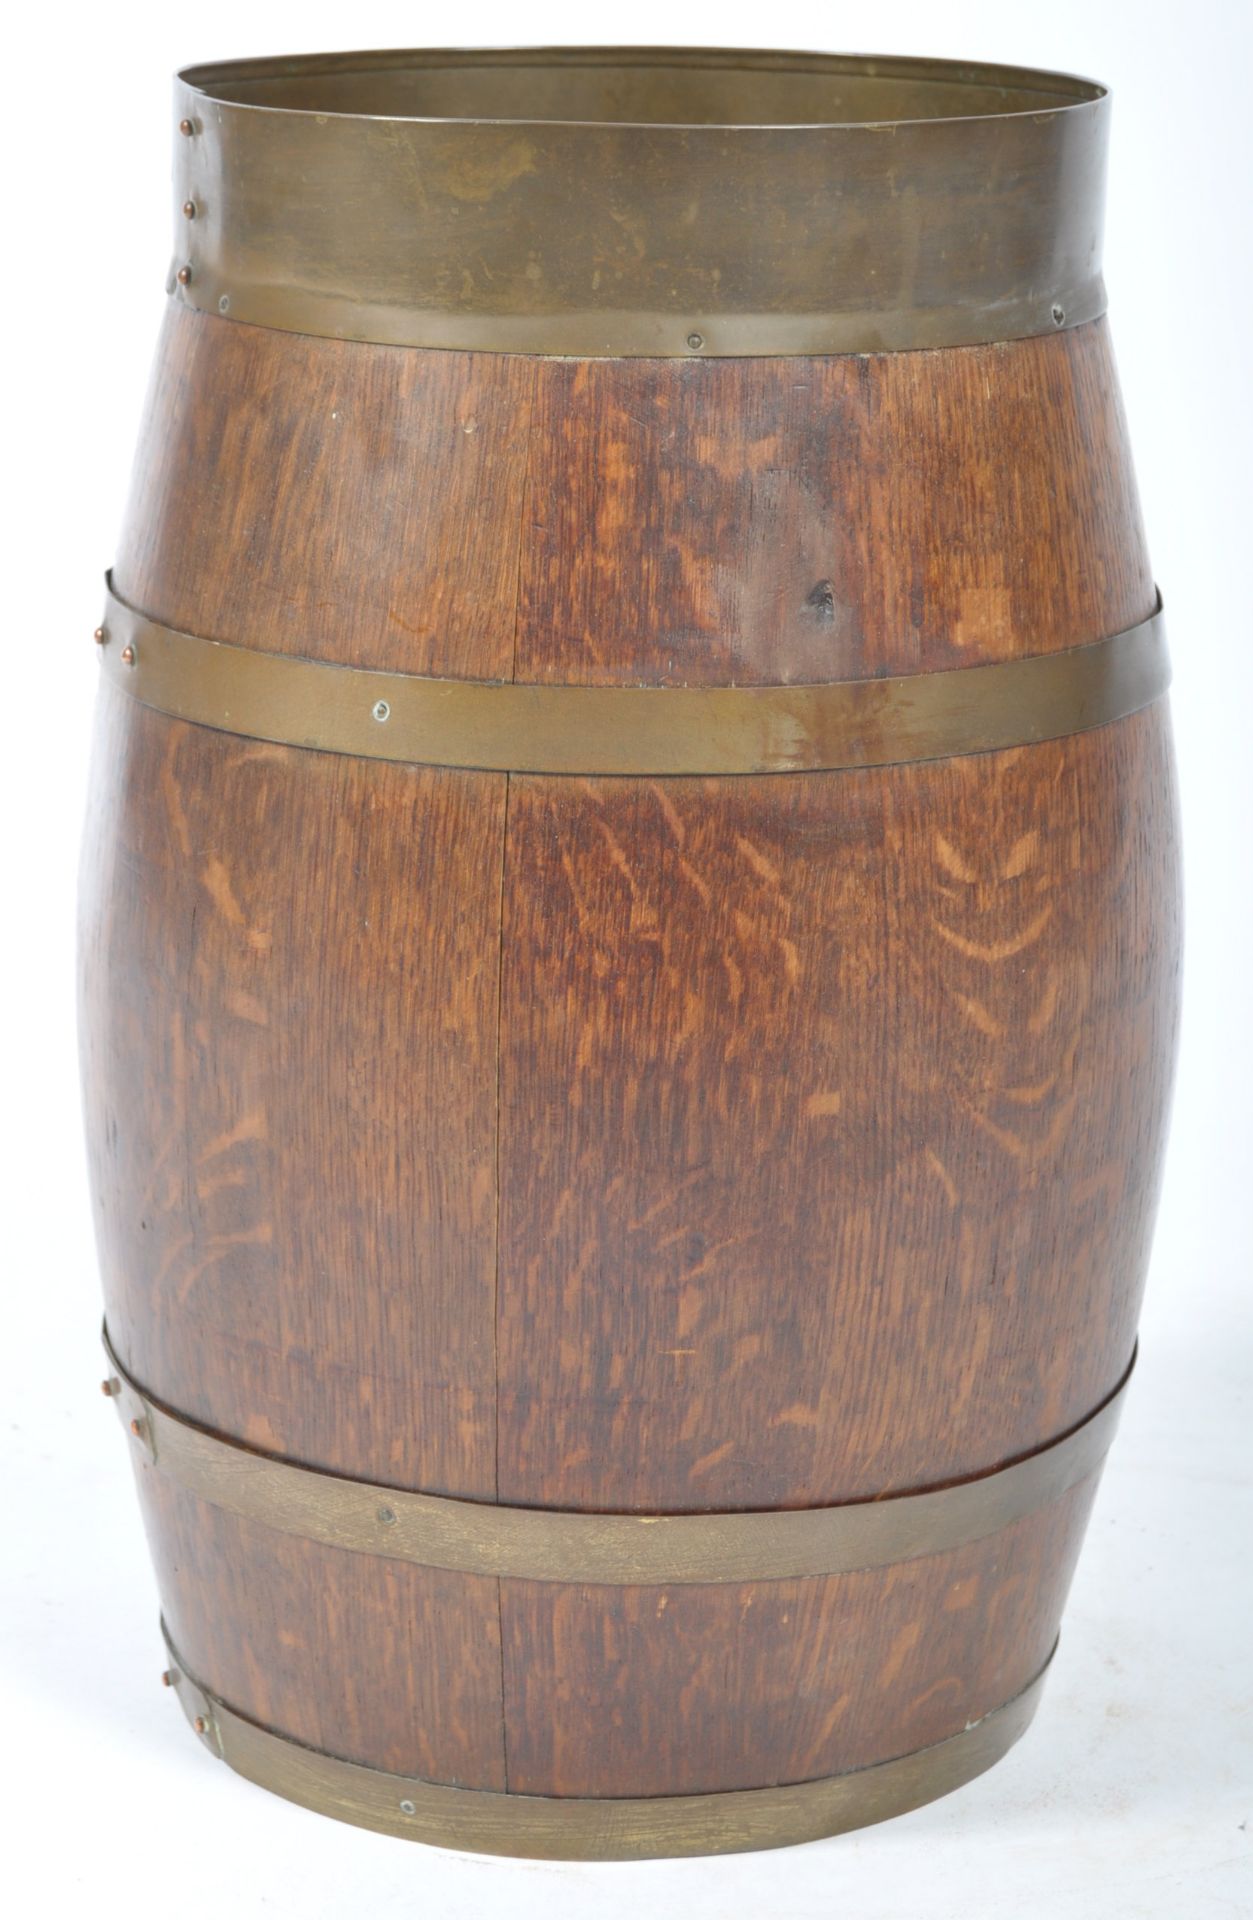 19TH CENTURY OAK AND BRASS COOPERED BARREL STICK / UMBRELLA STAND - Image 6 of 7